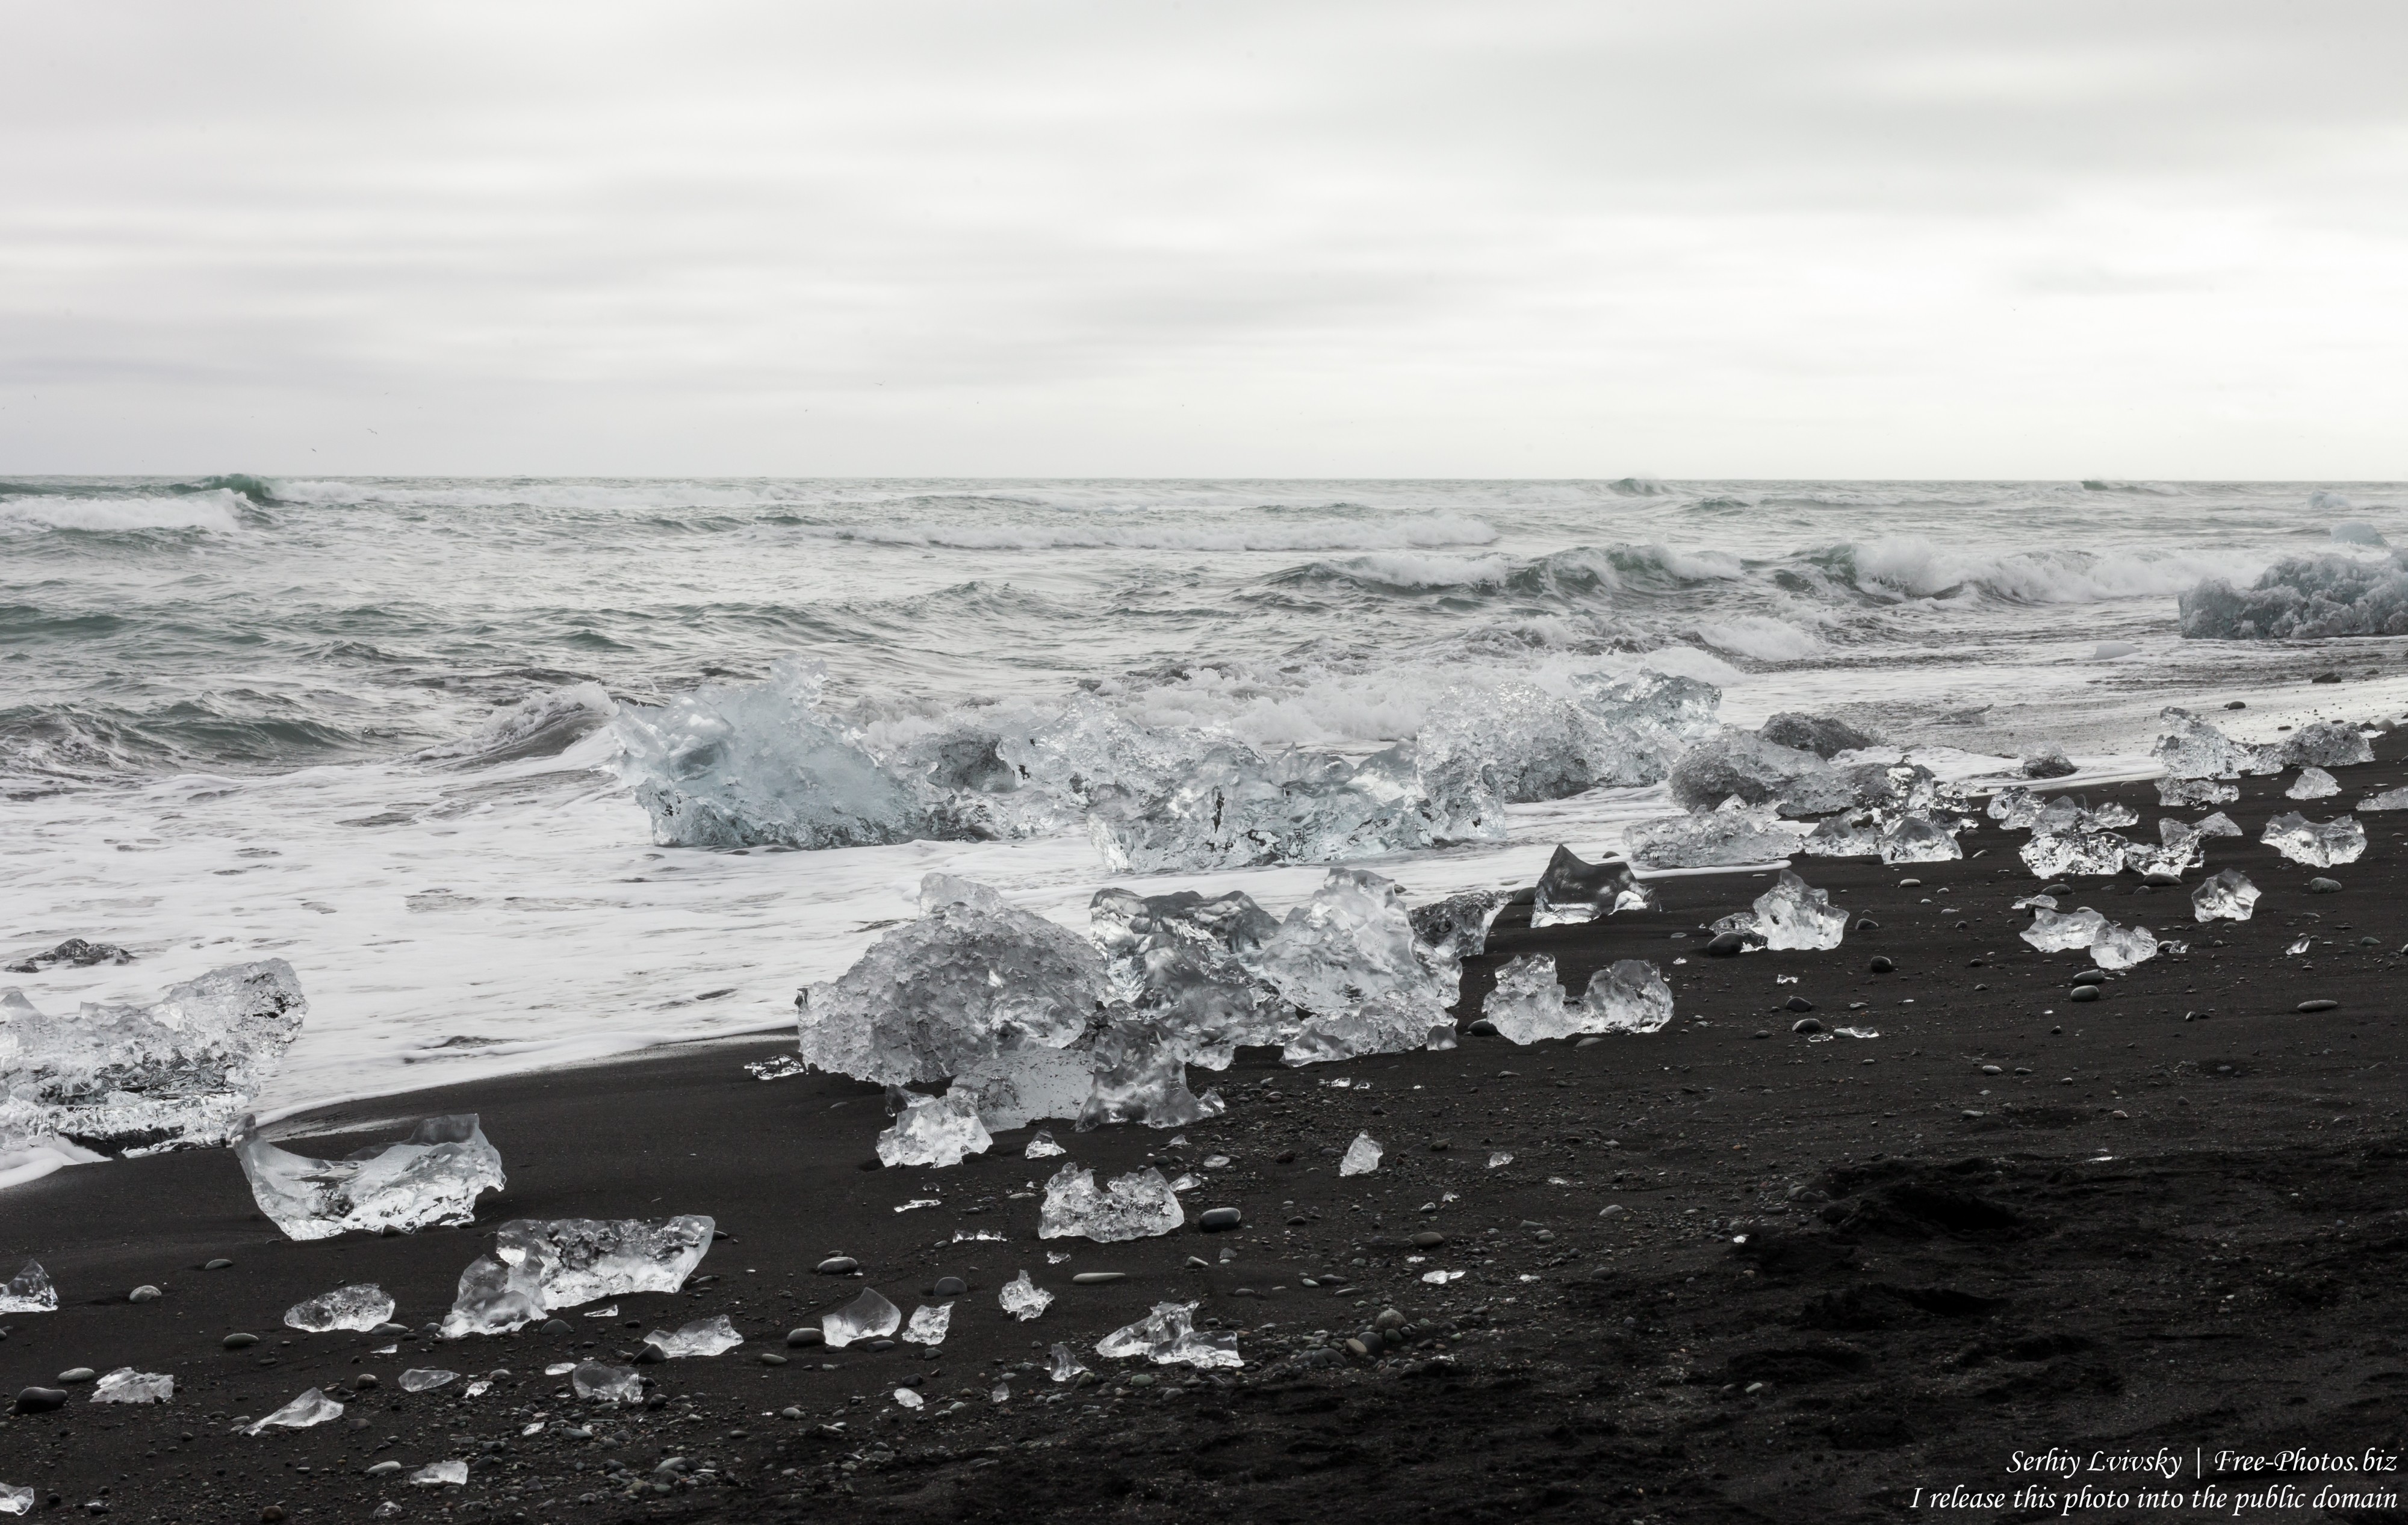 Diamond Beach, Iceland, in May 2019, photographed by Serhiy Lvivsky, picture 5